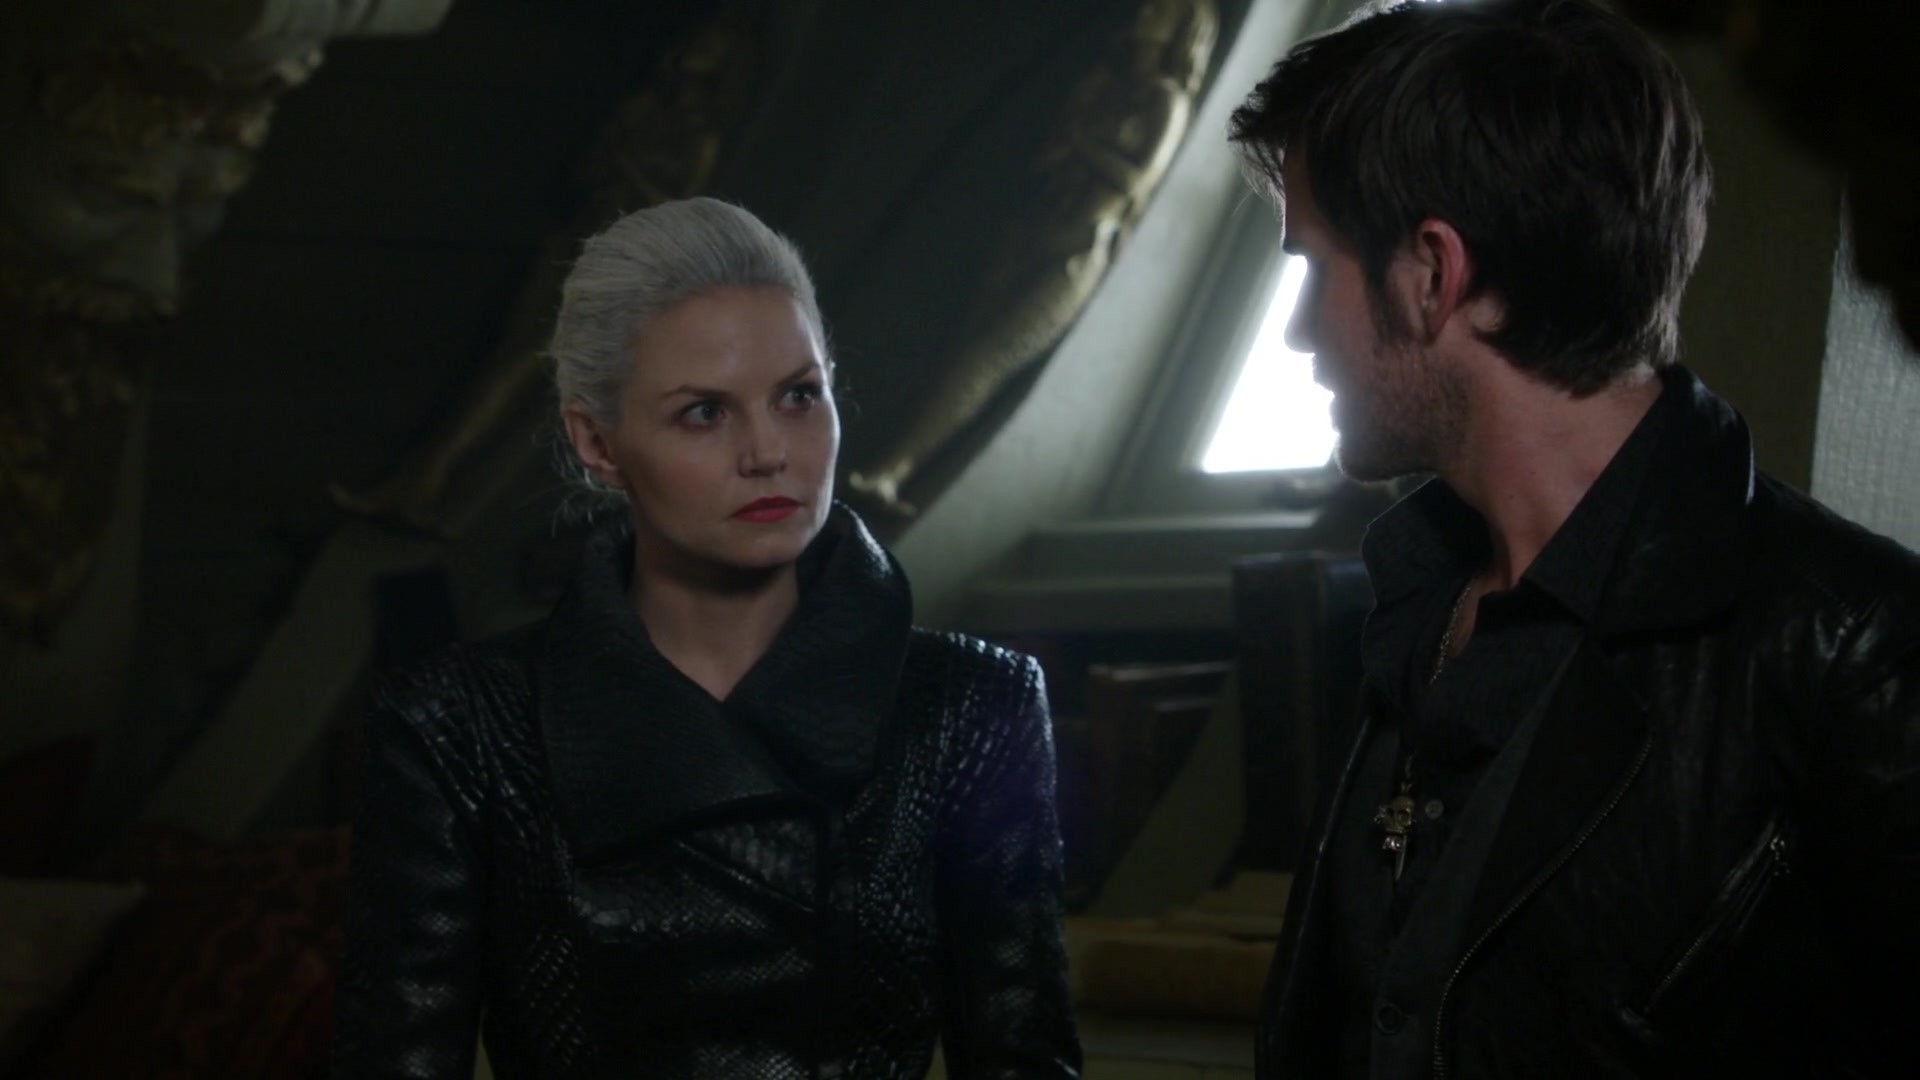 1920x1080 Once Upon a Time - 5x03 - Siege Perilous - Emma and Hook.jpg